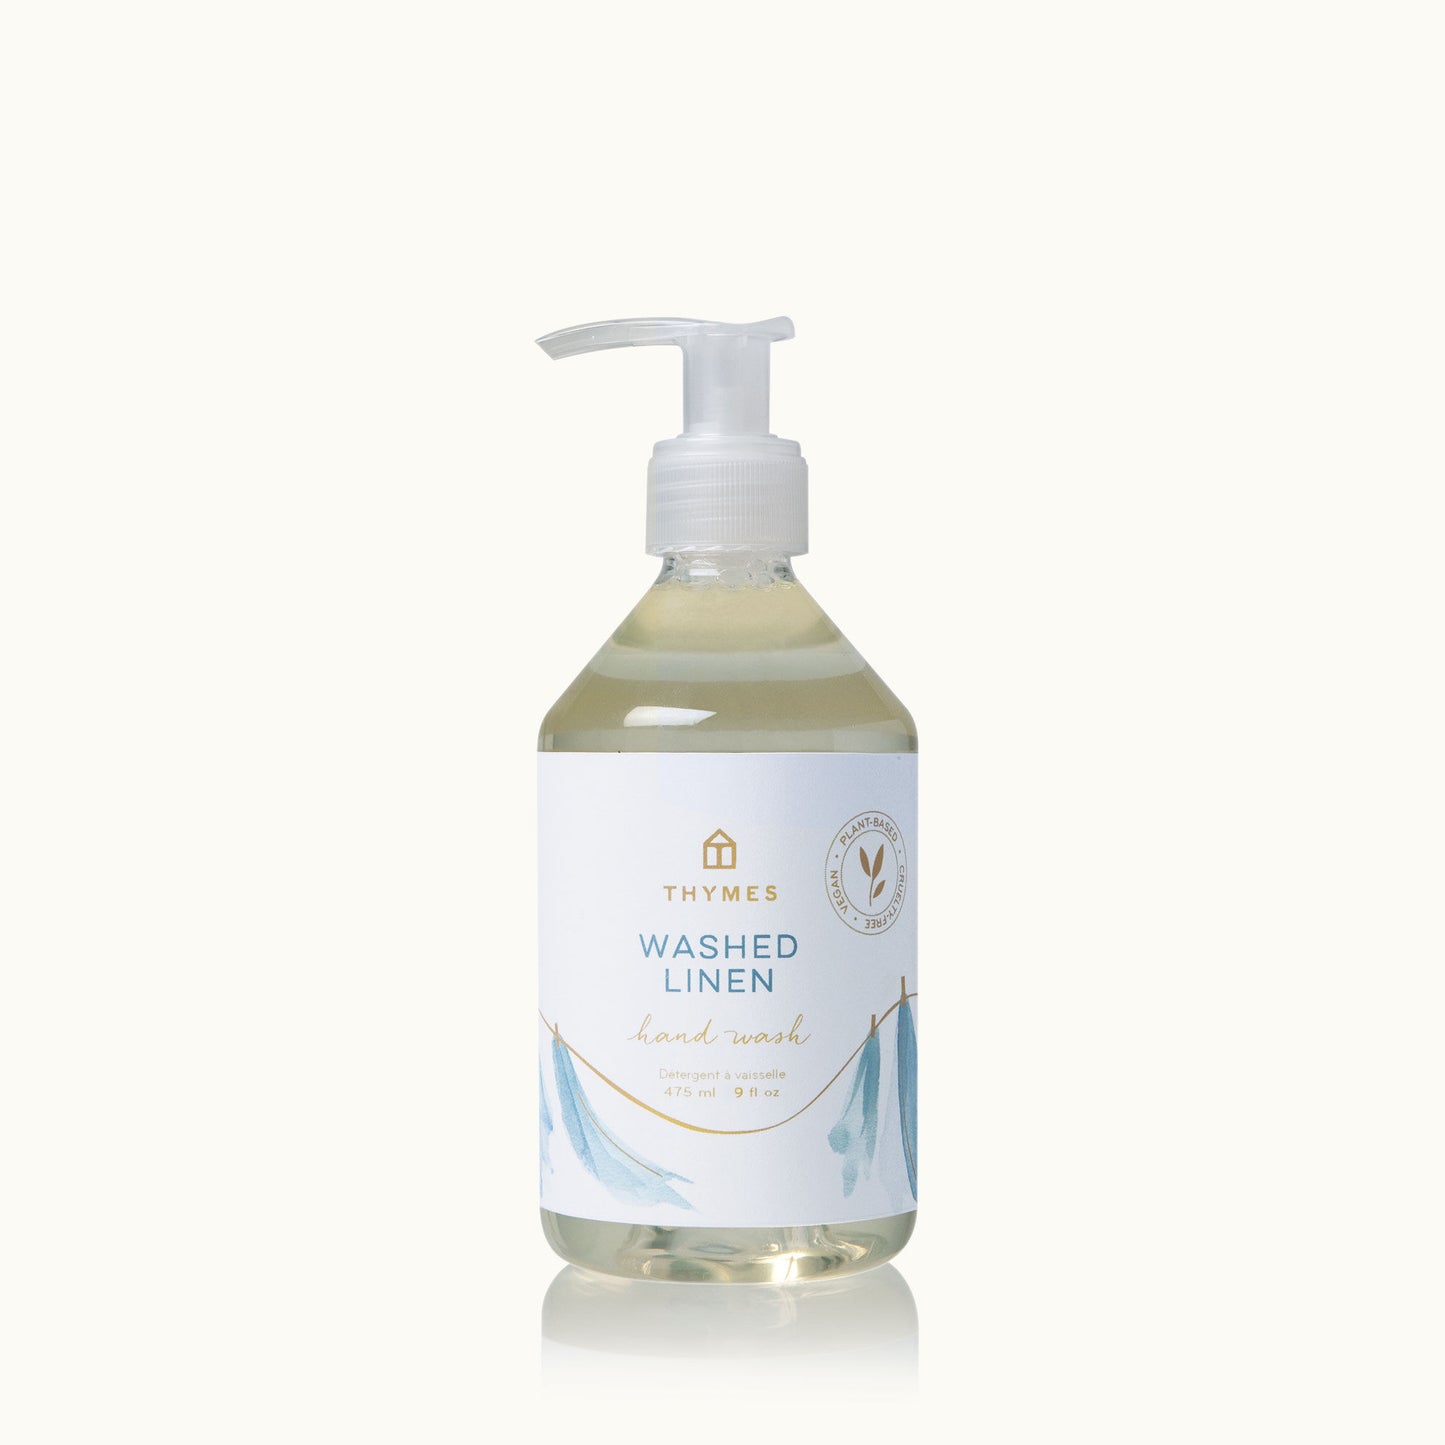 Thymes  Hand Wash 9oz., Washed Linen